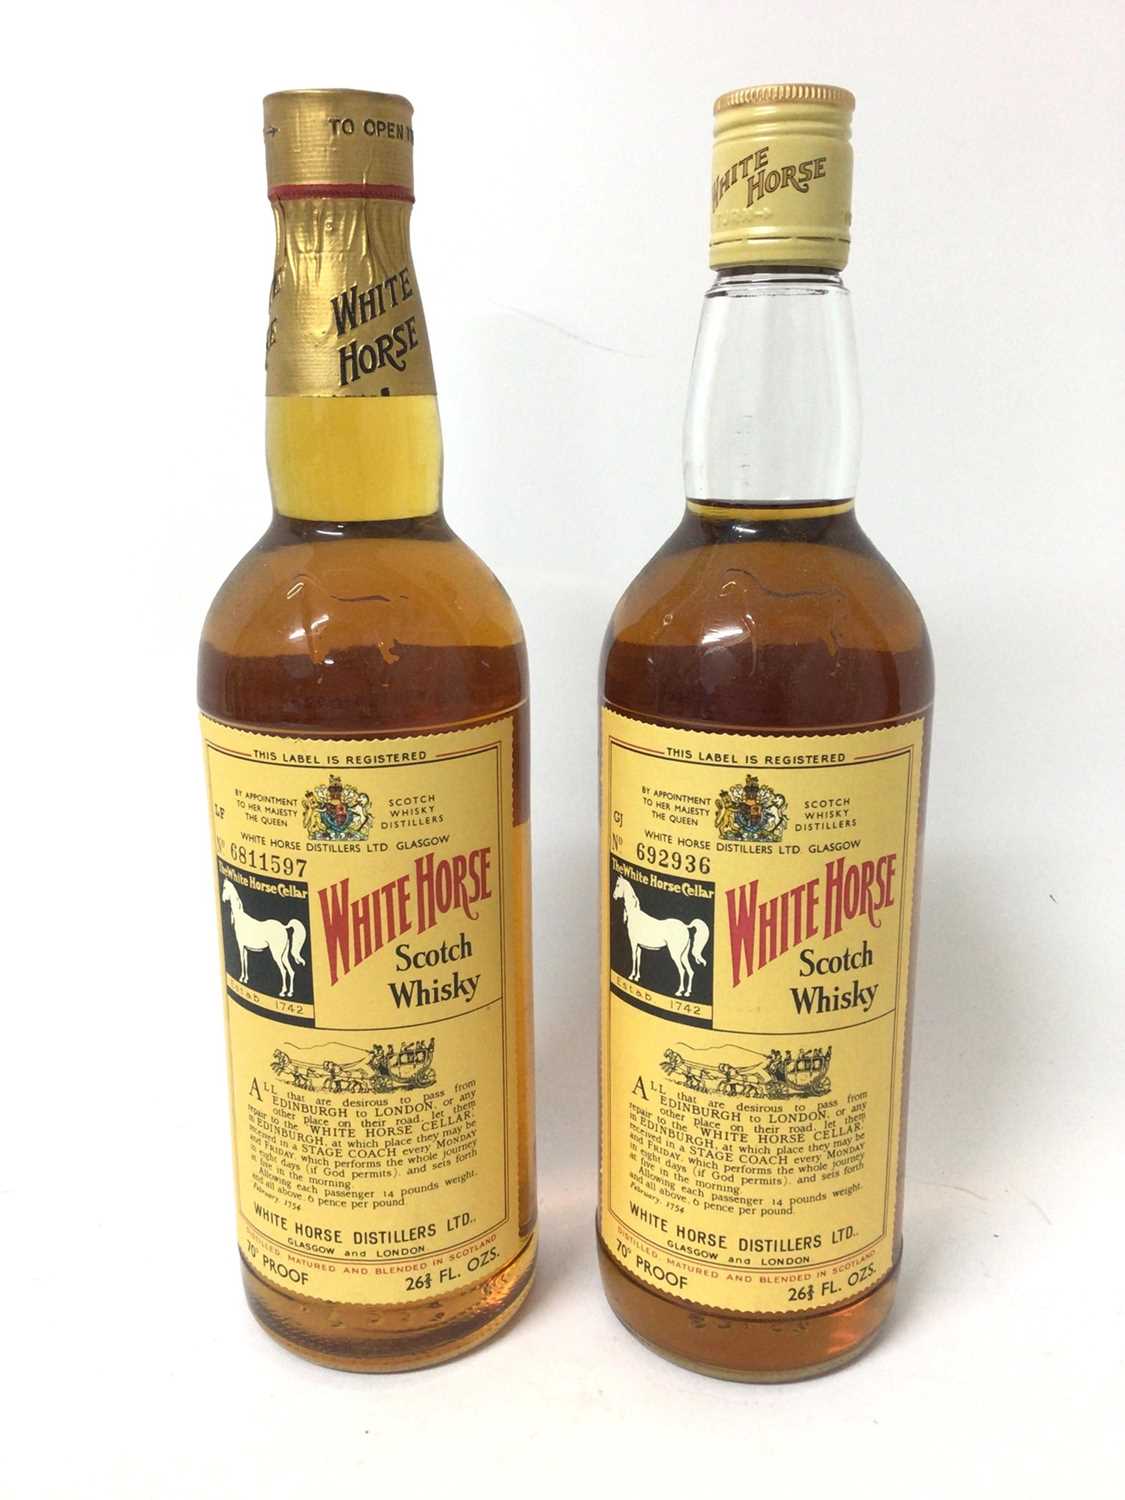 Lot 29 - Two bottles of White Horse Scotch Whisky, 70 proof, 26 2/3 fl. oz